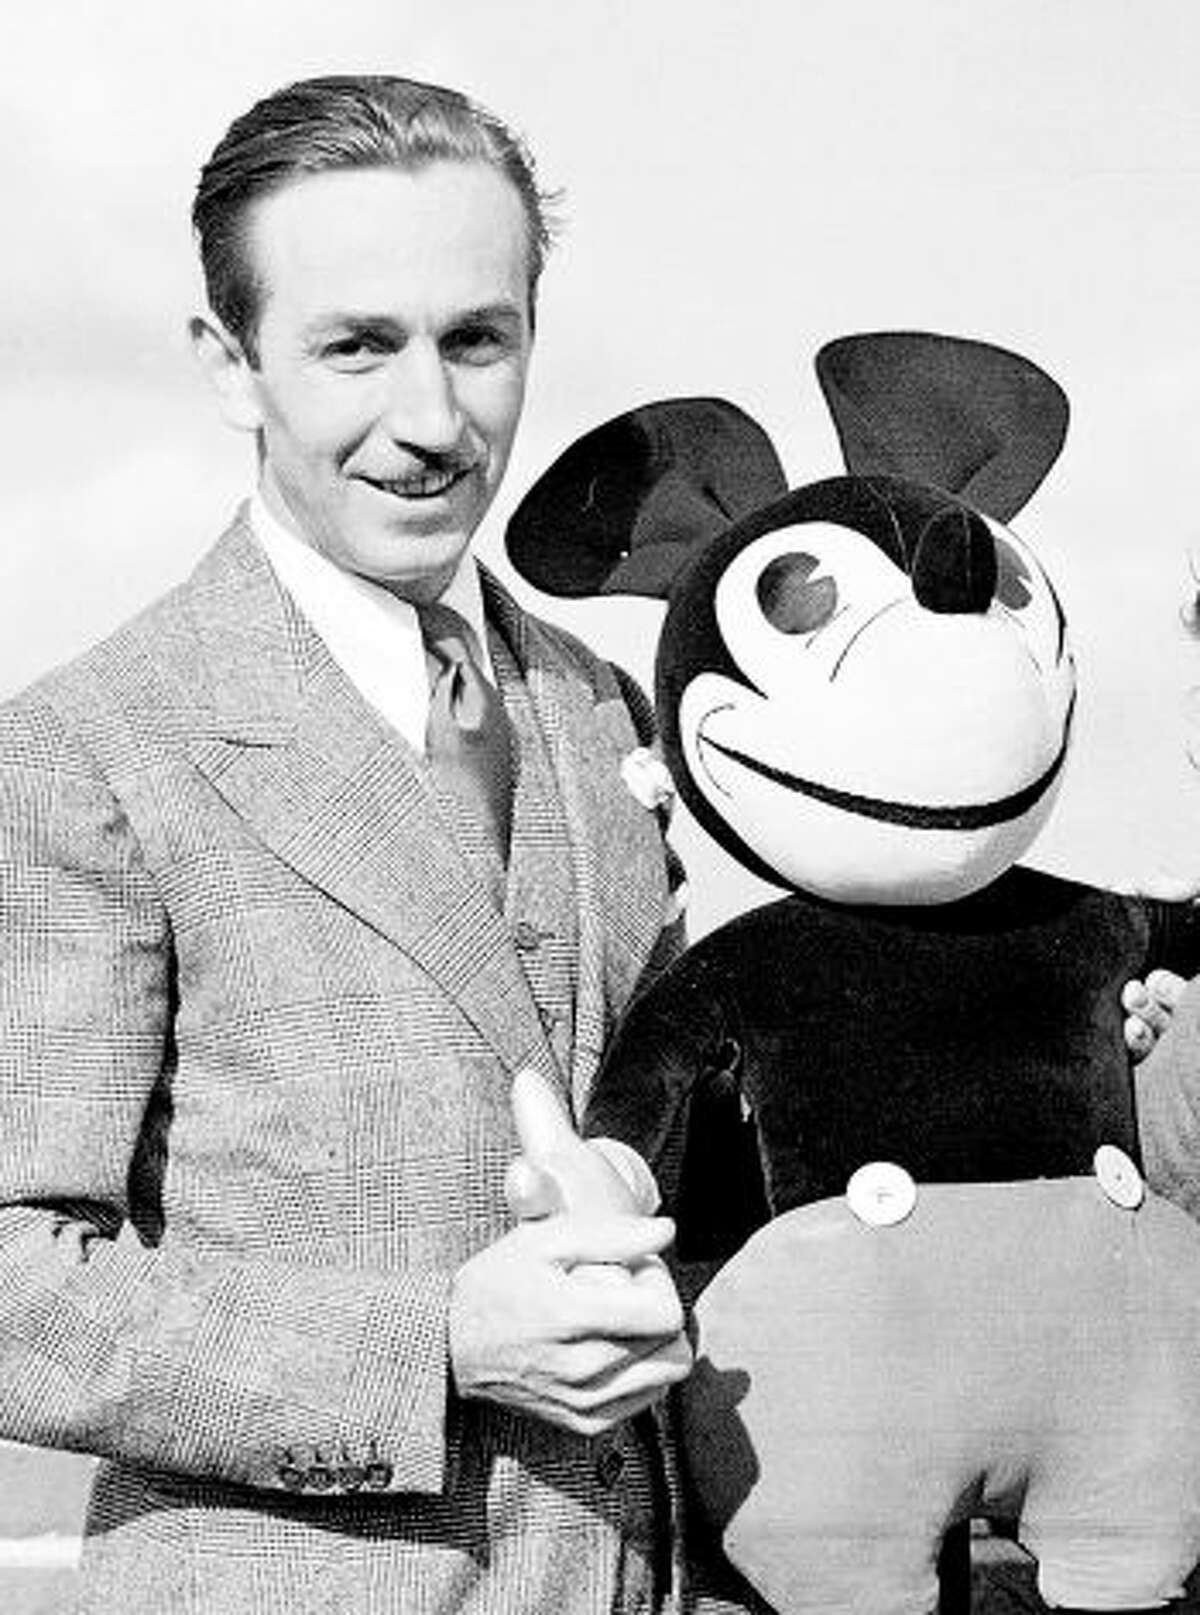 As the Walt Disney Company turns 90 years old this week, let's take a look back at the American entertainment icon. October 16, 1923 Walt Disney starts The Disney company, first known as The Disney Brothers Studio. (thewaltdisneycompany.com)